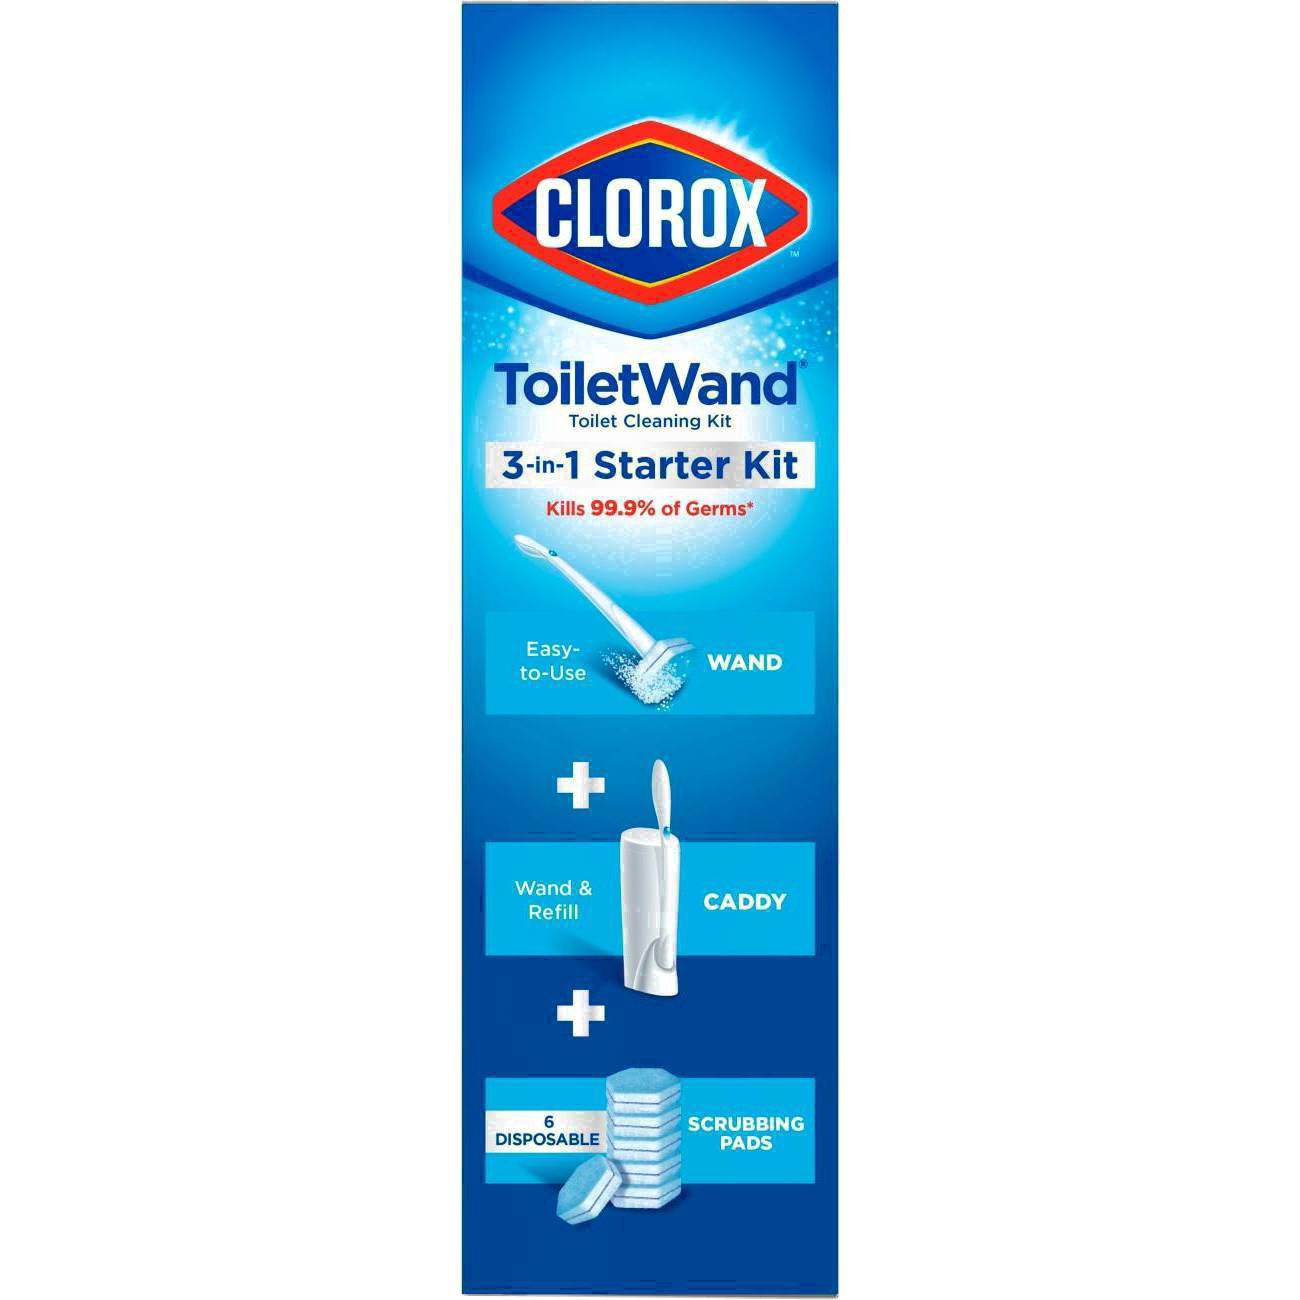 slide 110 of 176, Clorox Toilet Wand 3-in-1 Starter Toliet Cleaning Kit, 1 ct